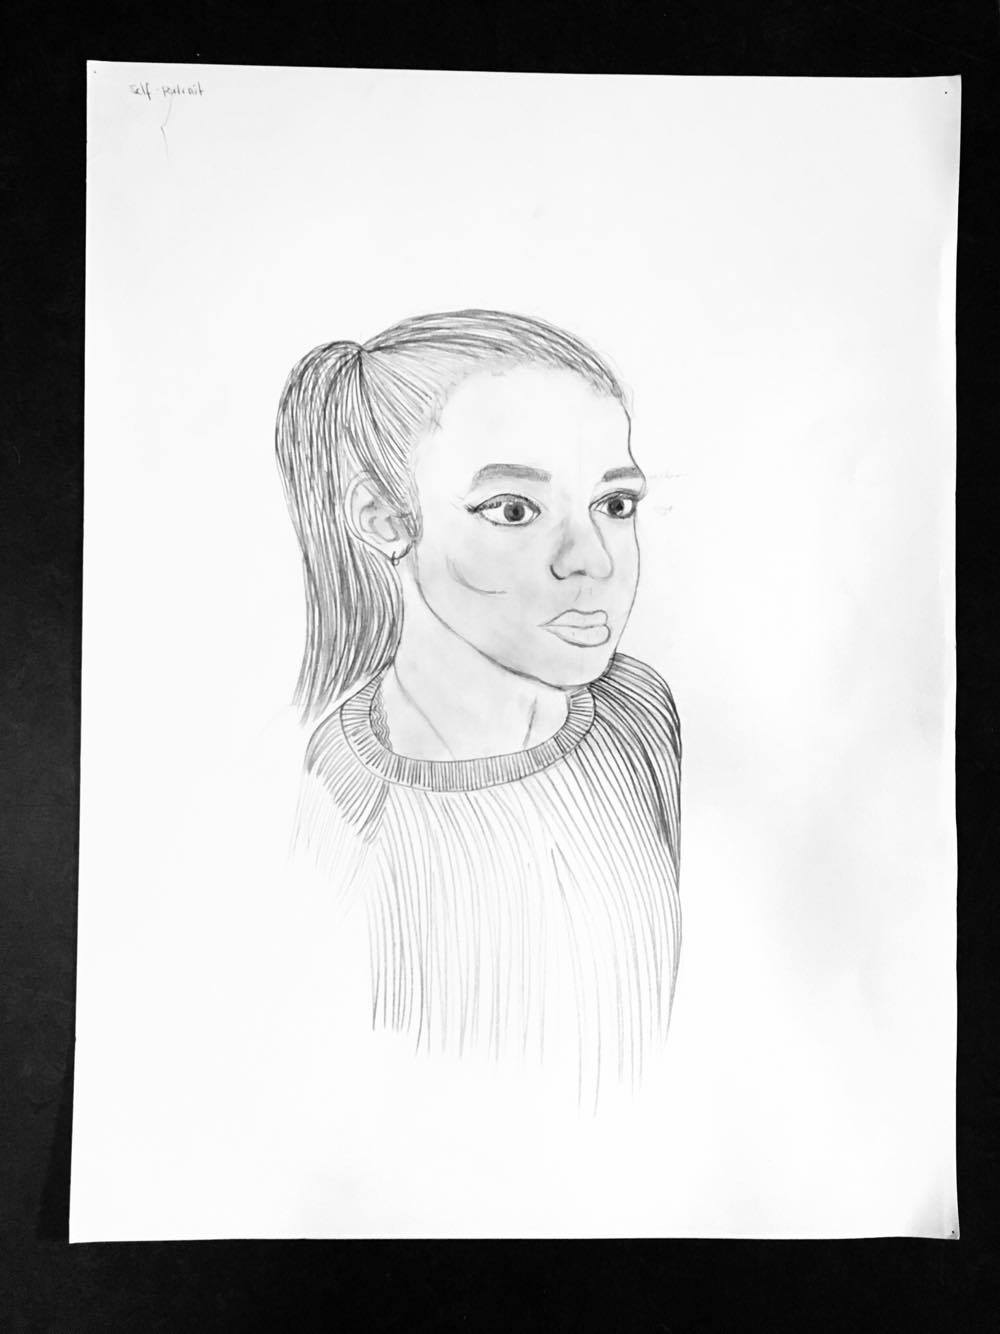 Drawing and Imaging: Self-Portrait